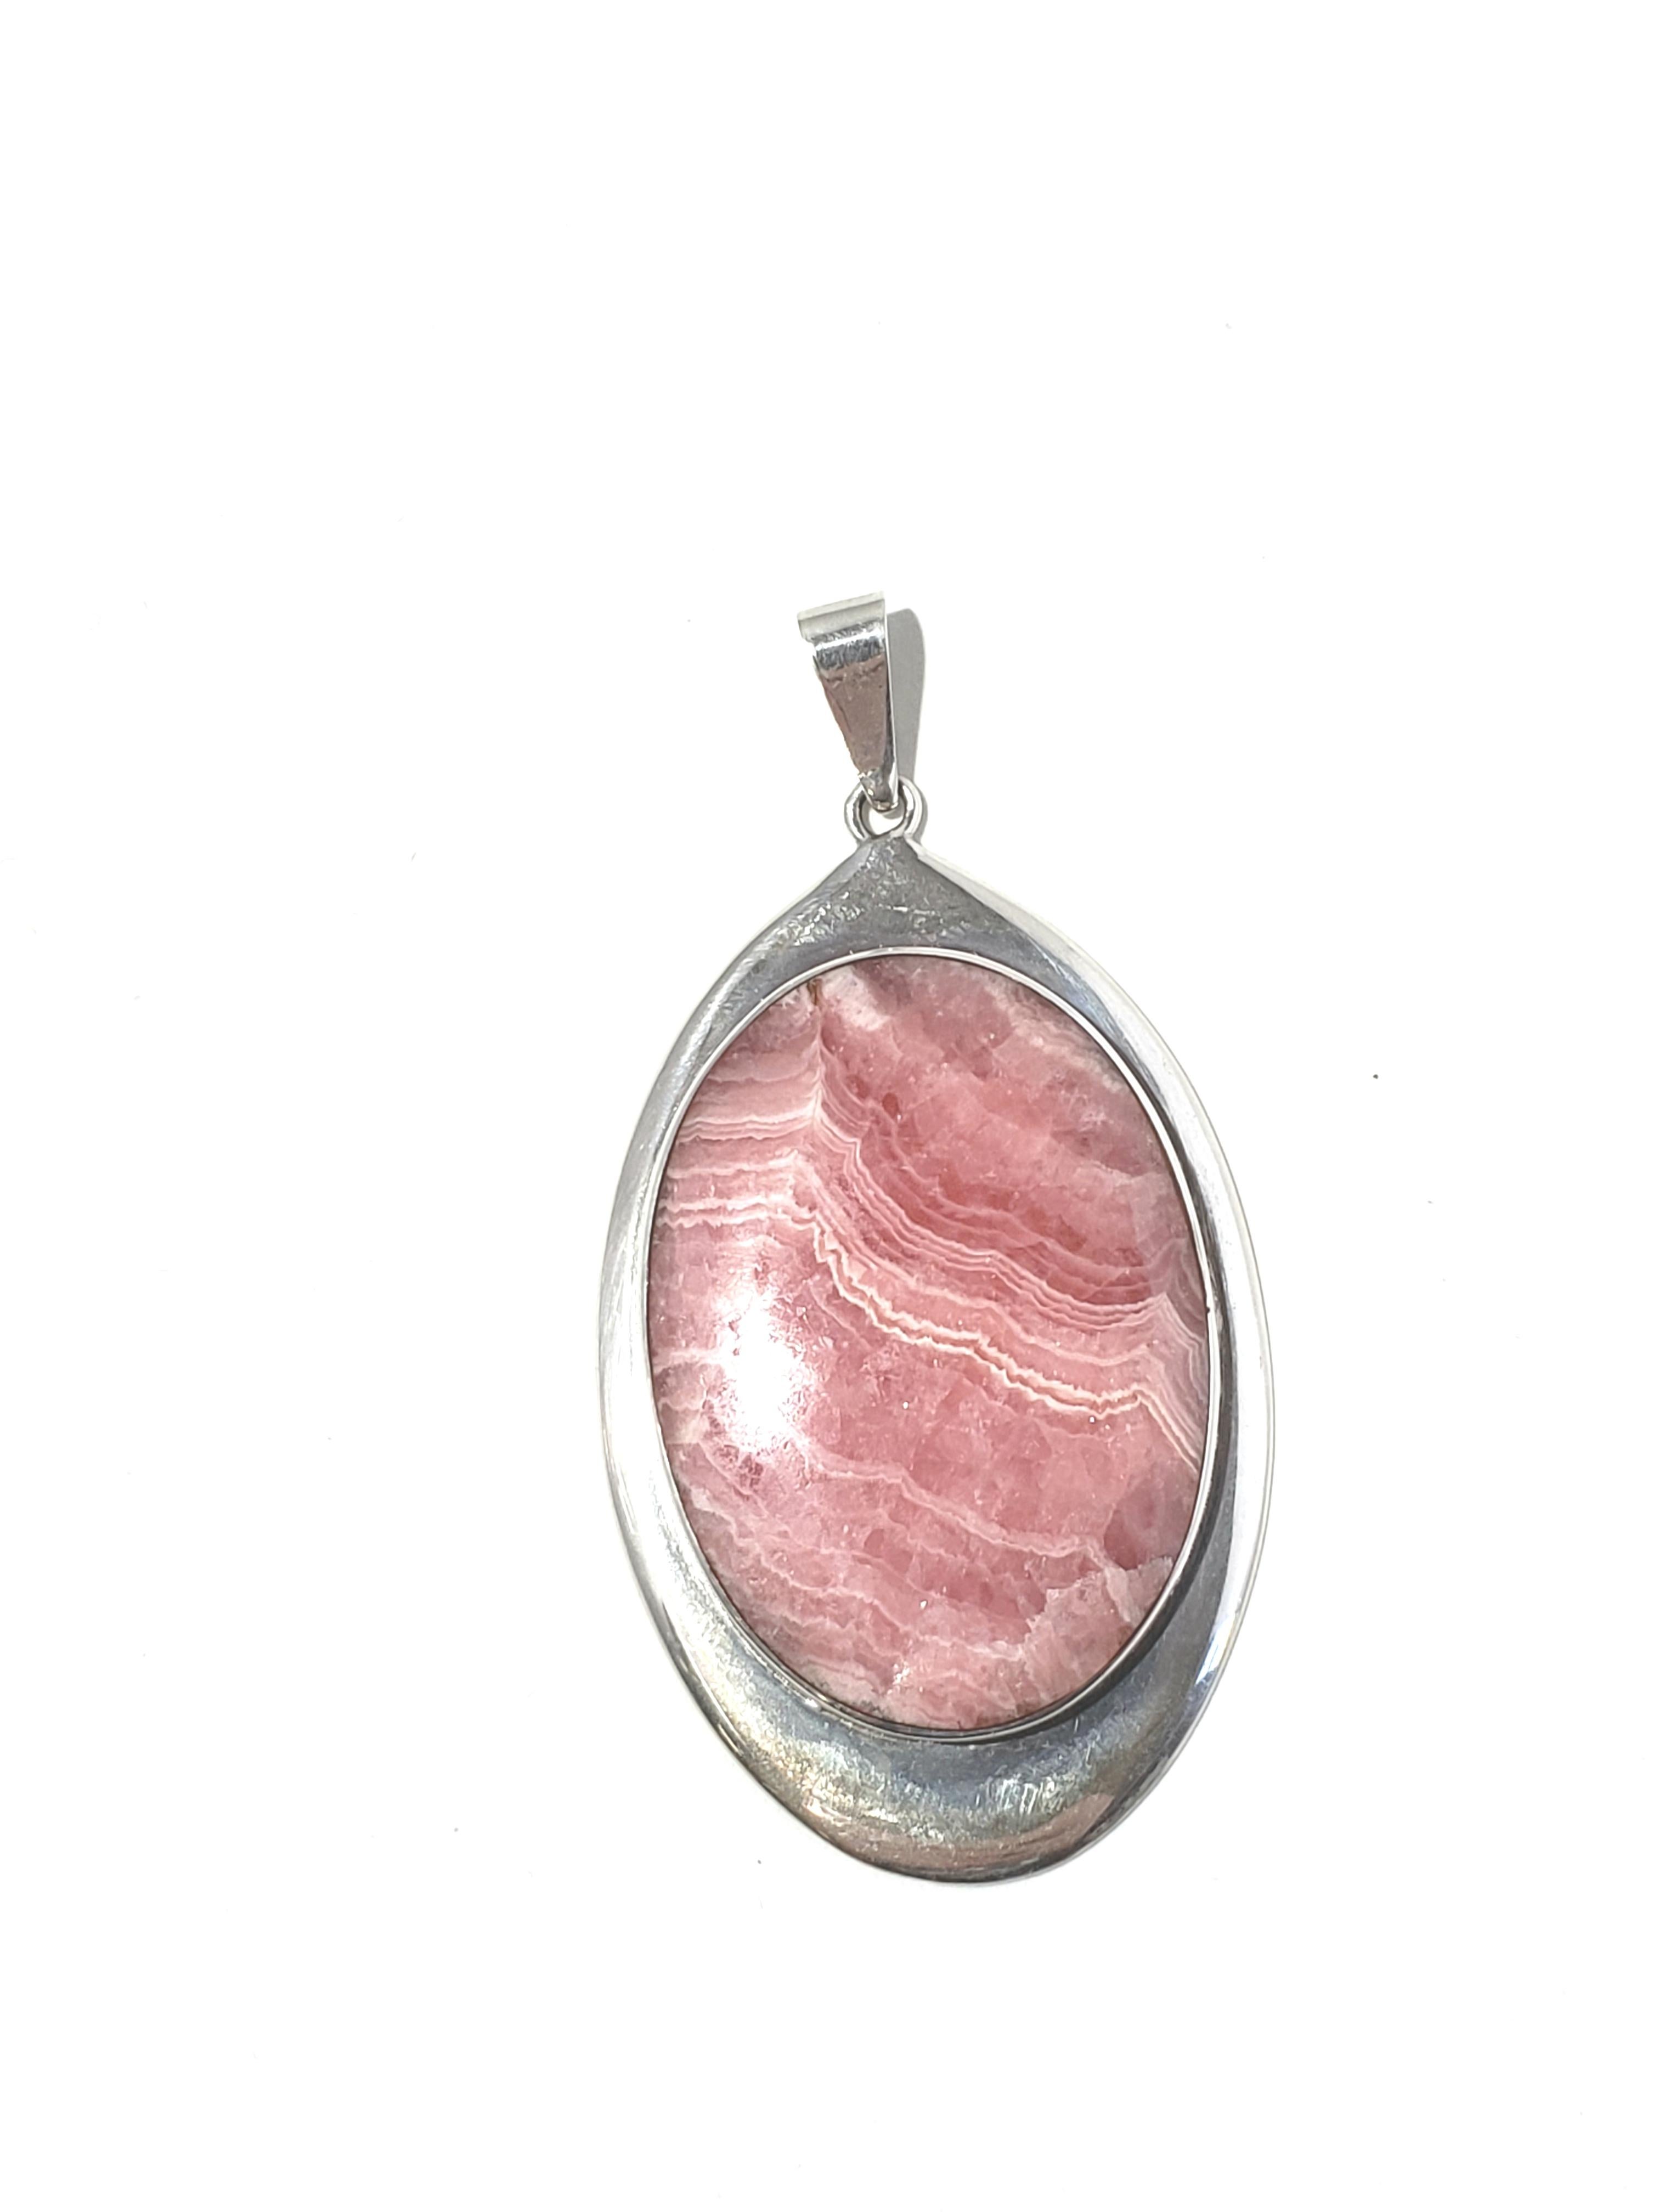 Sterling Silver Rhodochrosite Oval Pendant

This is a lovely sterling silver Rhodochrosite Oval Pendant.  

Measurements:  Pendant measures 2 and 1/4 inches in length, 1 and 5/16 inches in width.  Pendant hangs approx 2 1/2 inches from the top of